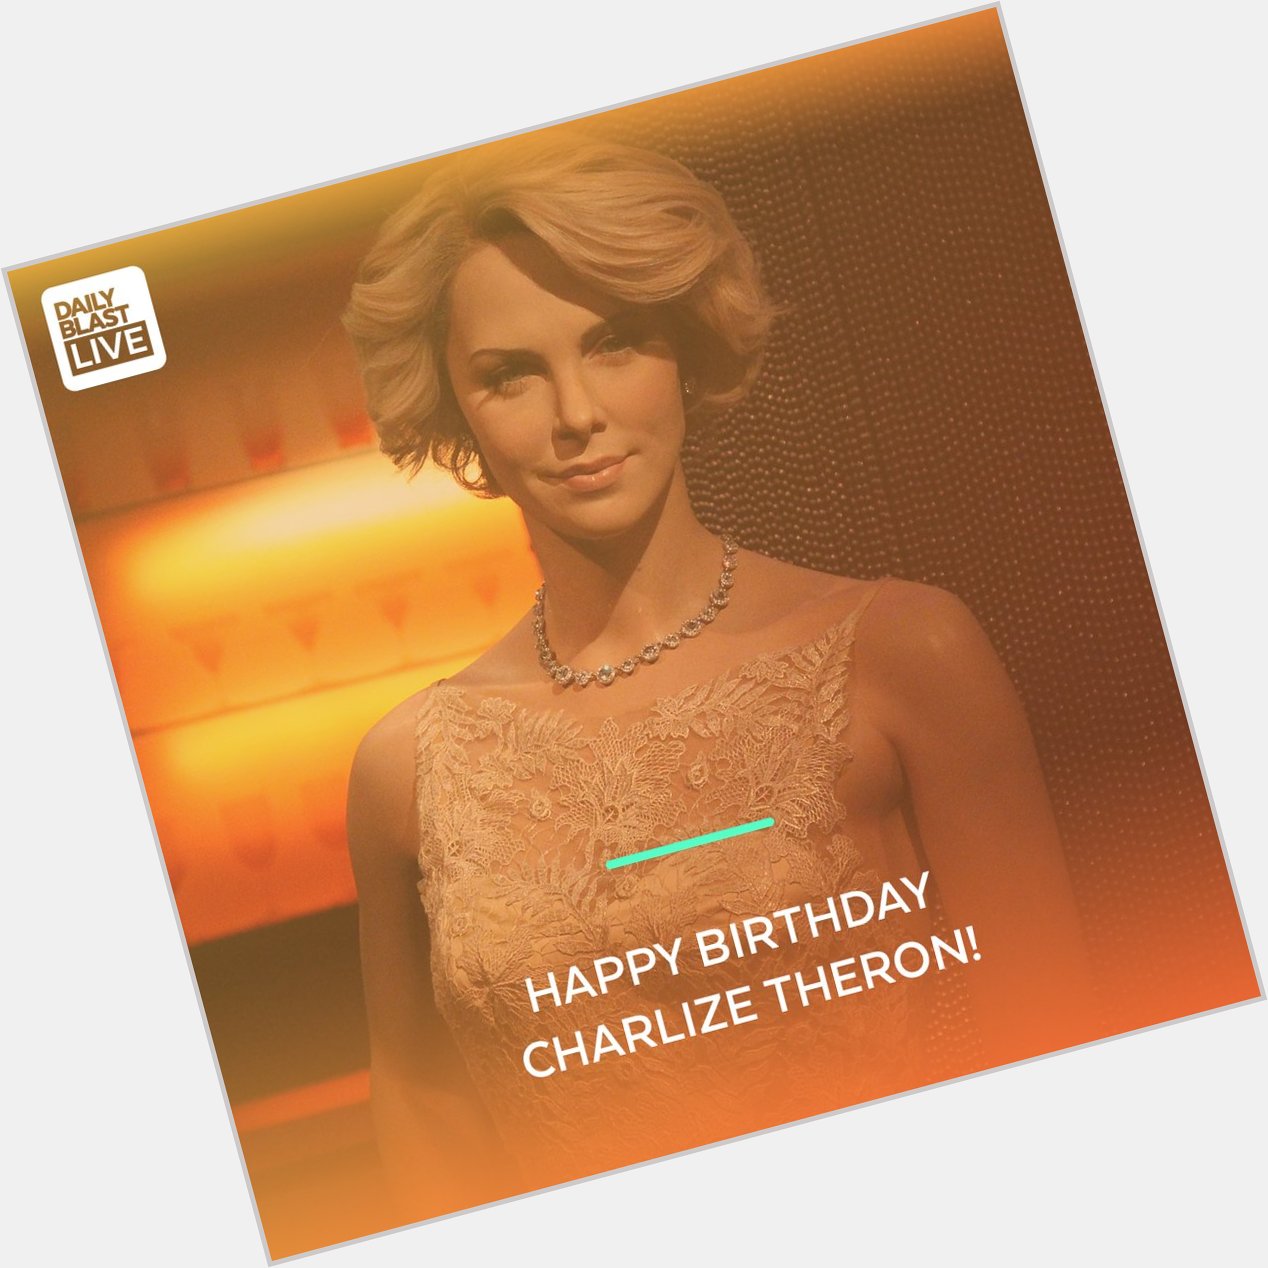 Move over Bond for the Atomic Blonde! 

Happy birthday Charlize Theron! 